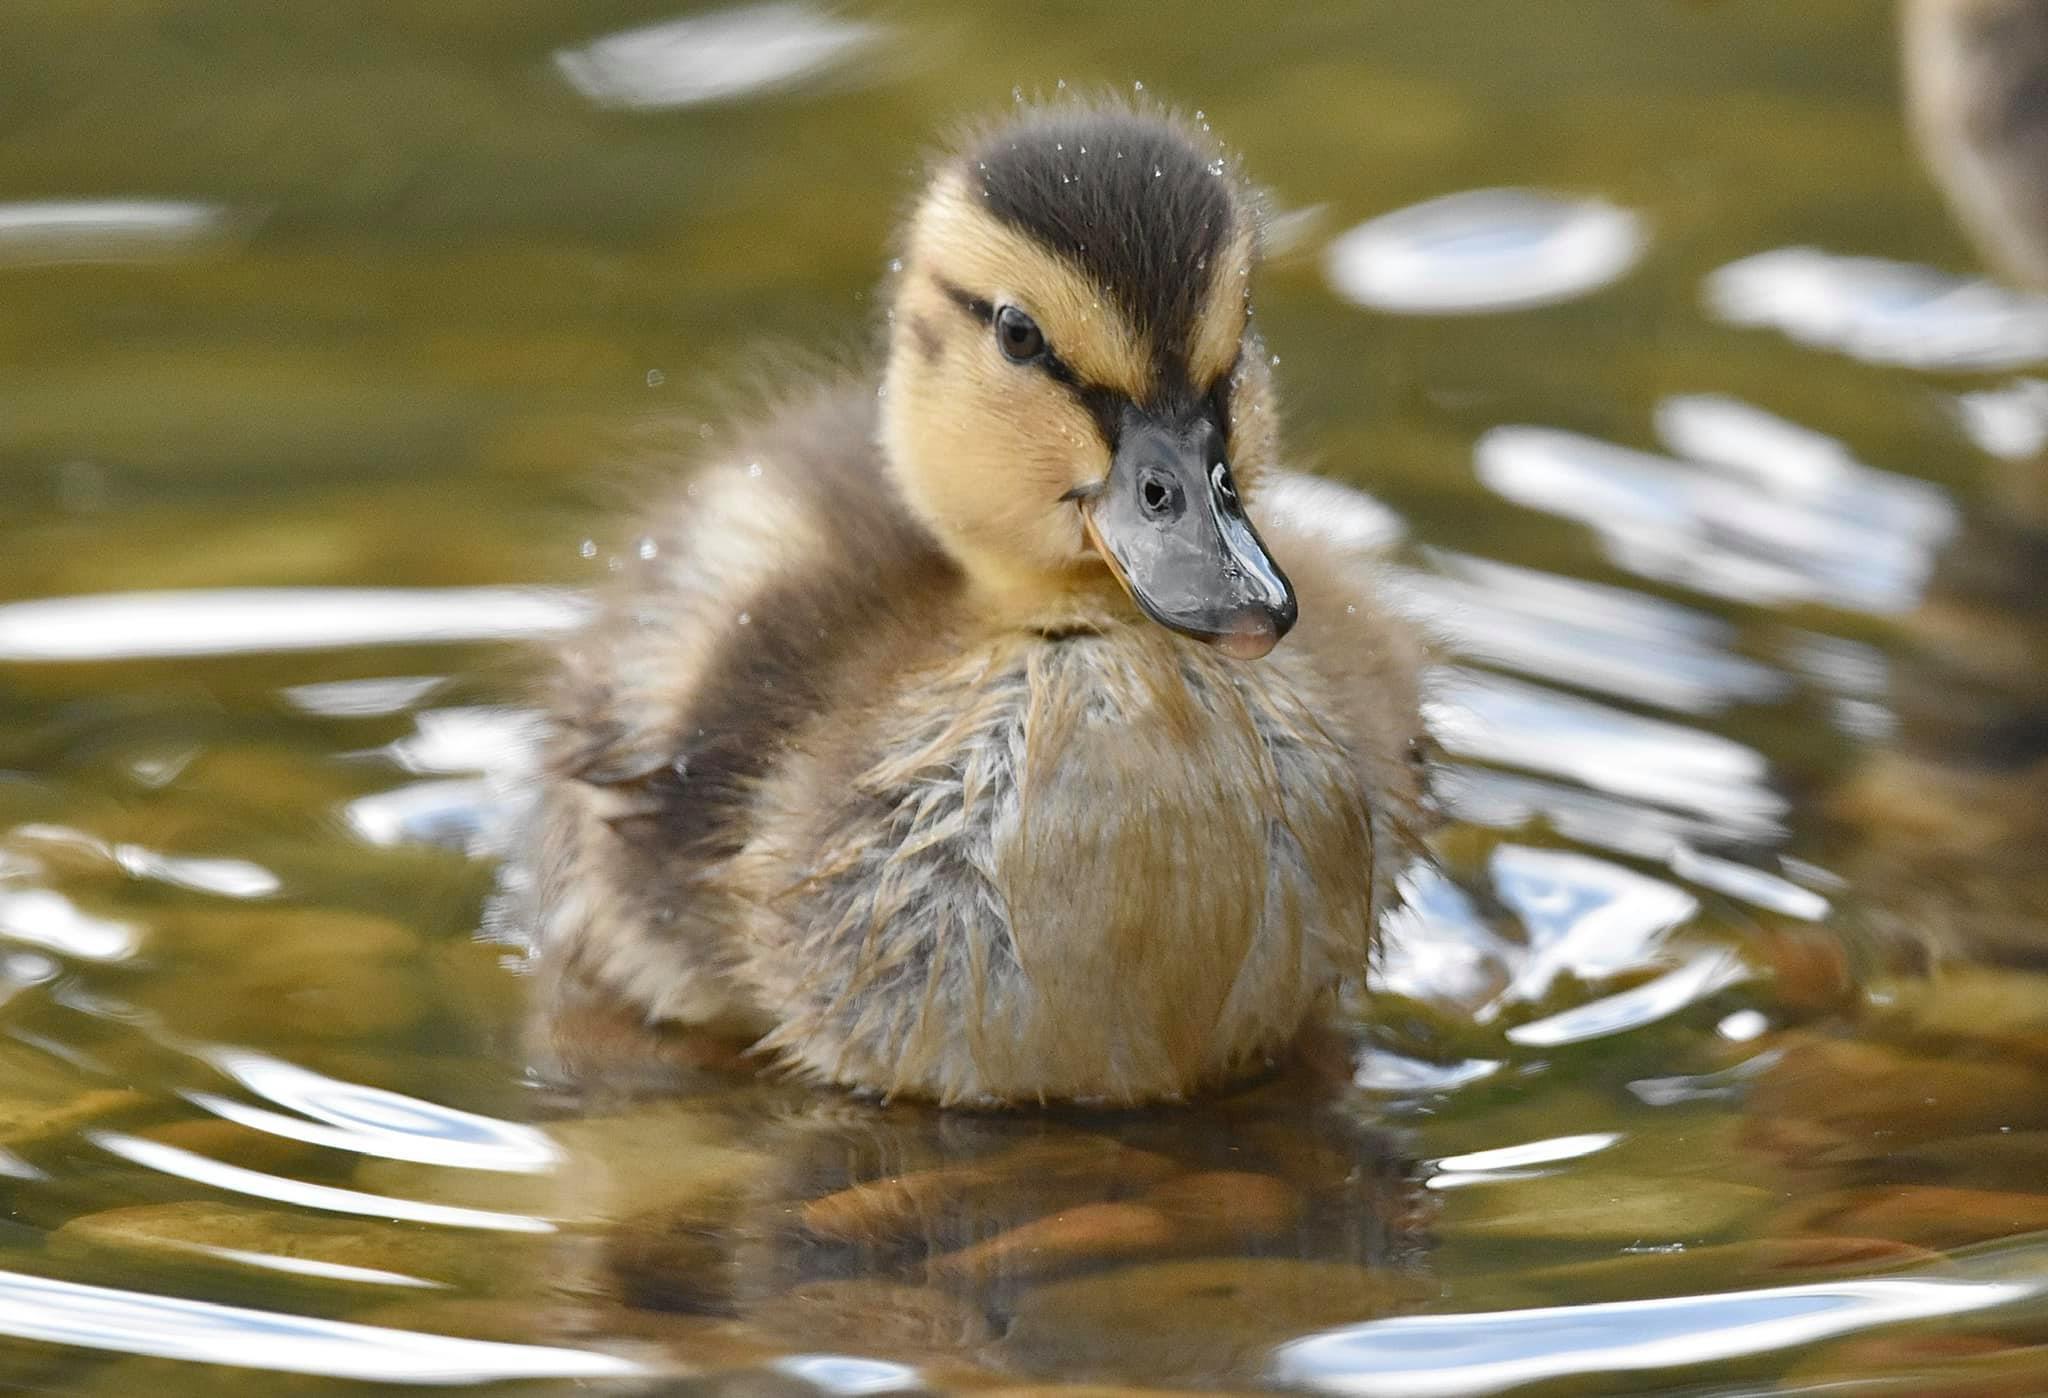 A cute duckling pictured by Michelle Jackson